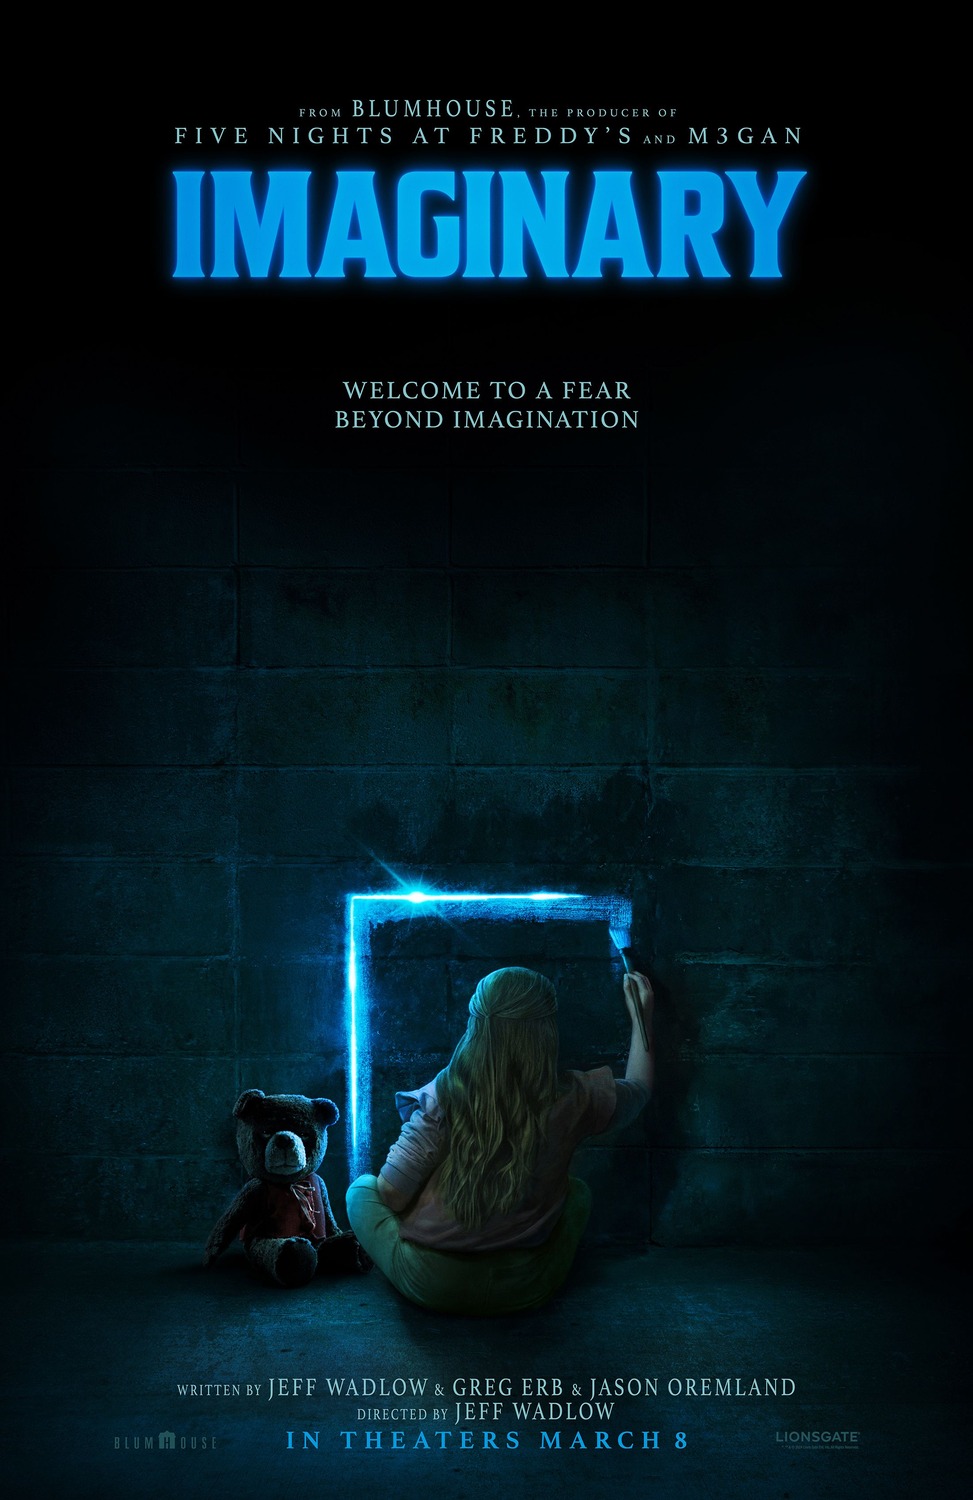 Extra Large Movie Poster Image for Imaginary (#2 of 2)